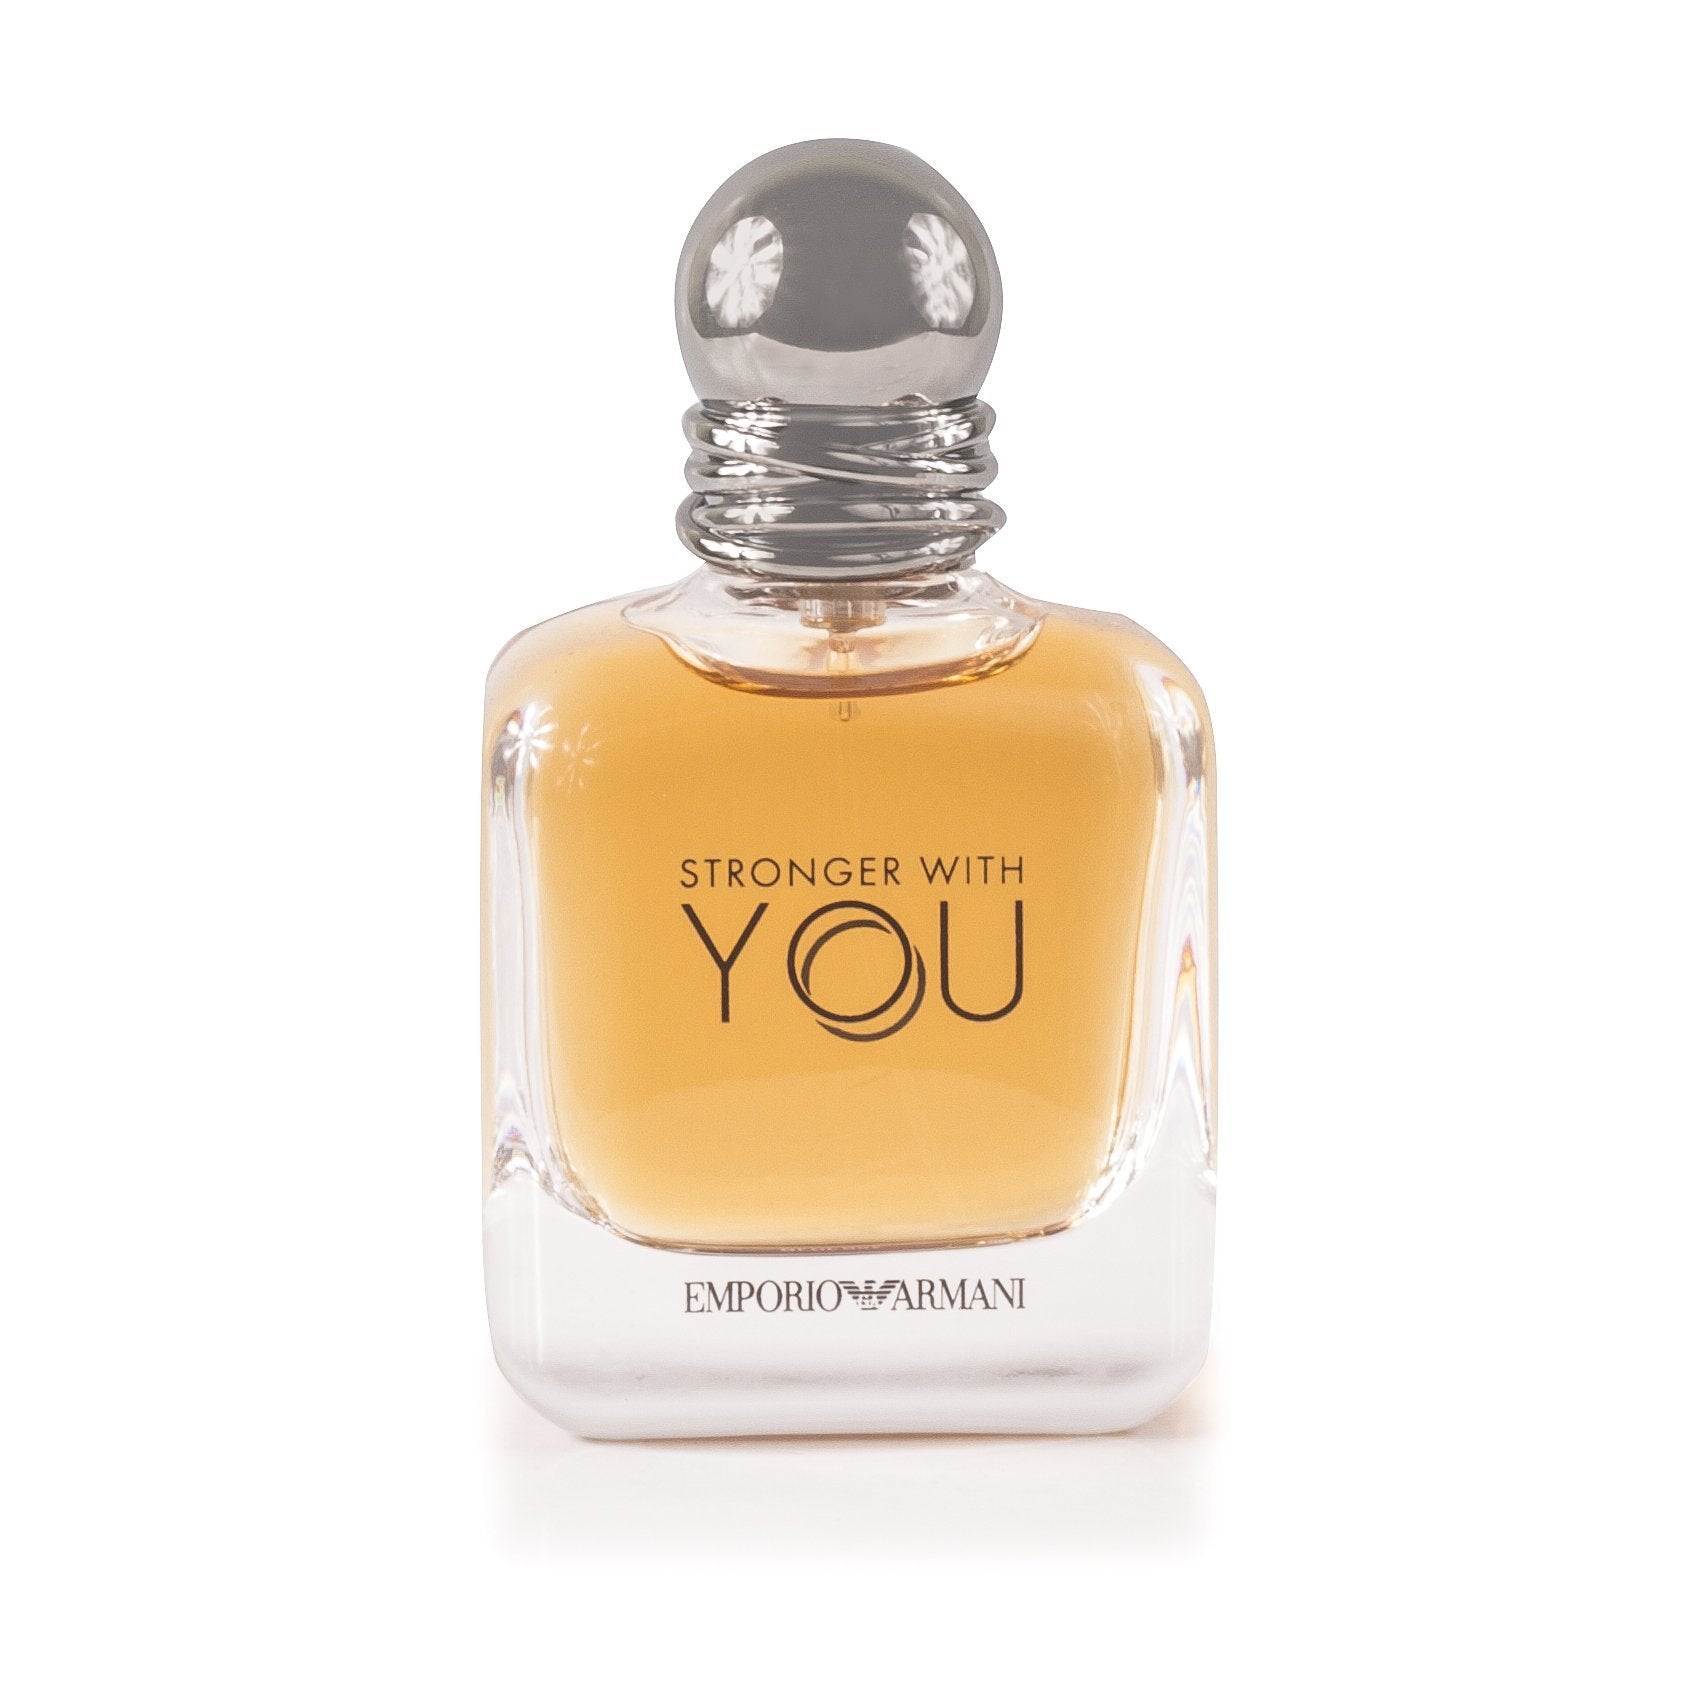 What does Stronger With You Absolutely by Emporio Armani smell like? T, Emporio Armani